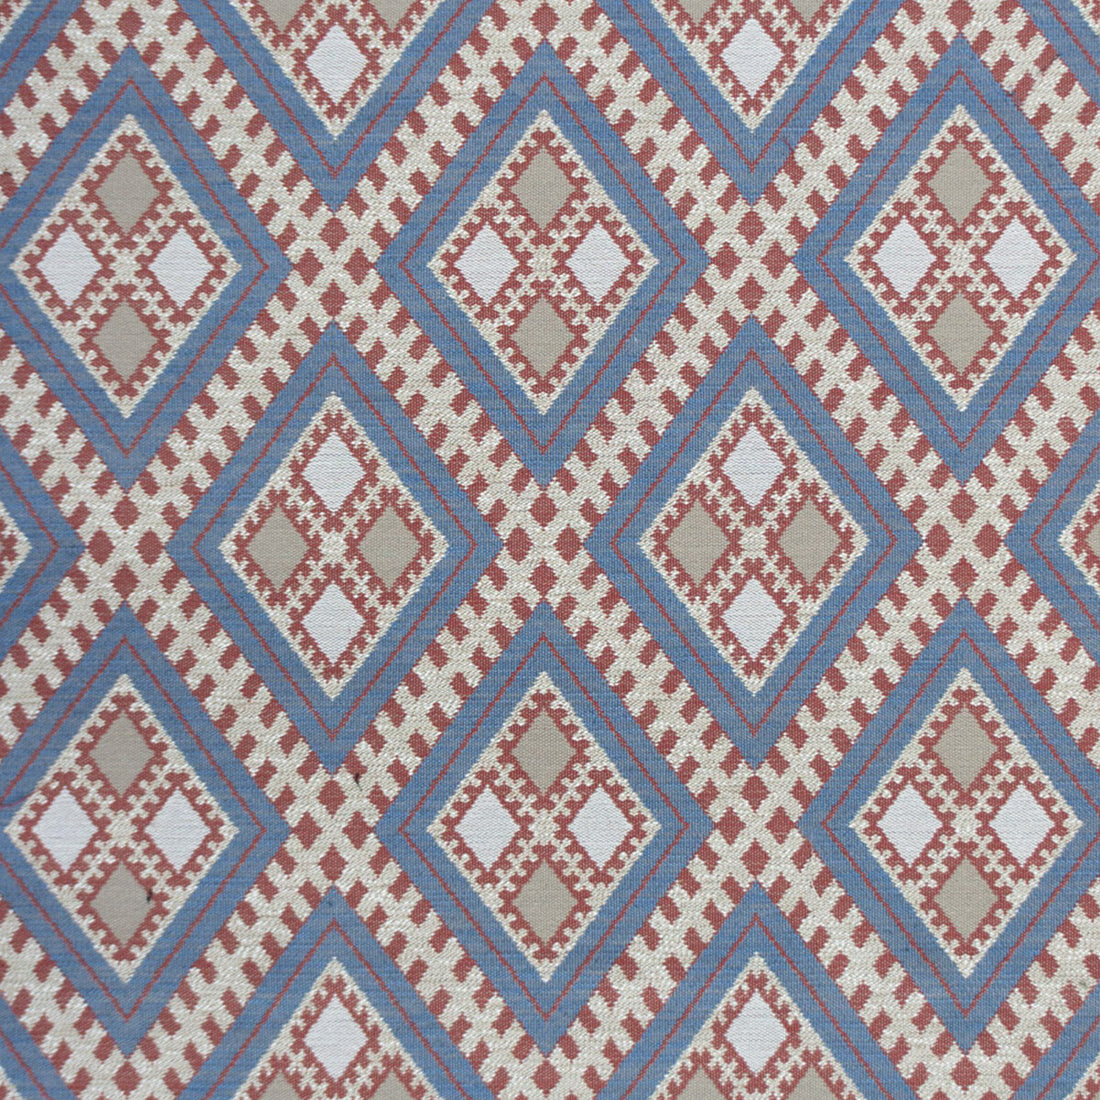 Chihuahua fabric in azul/rojo color - pattern GDT5656.003.0 - by Gaston y Daniela in the Gaston Rio Grande collection